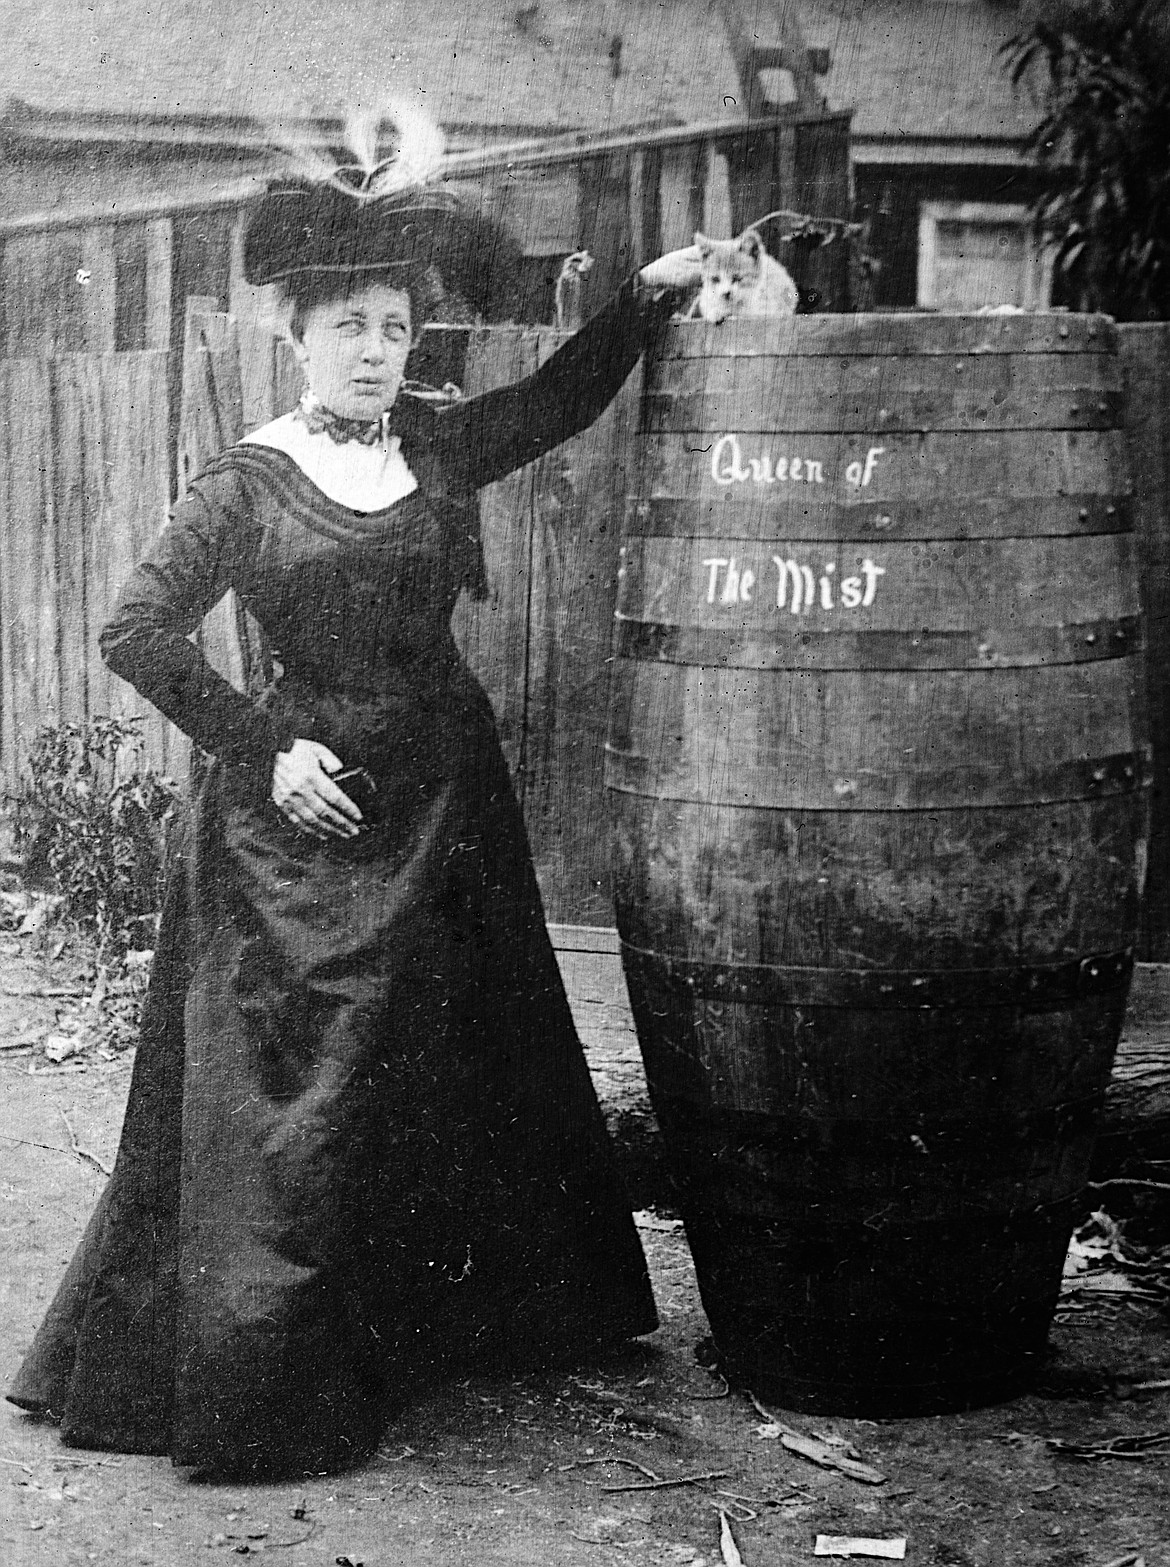 Annie Edson Taylor, first person to go over Niagara Falls in a barrel and survive, cat in photo went over the falls first in a test run (date unknown).